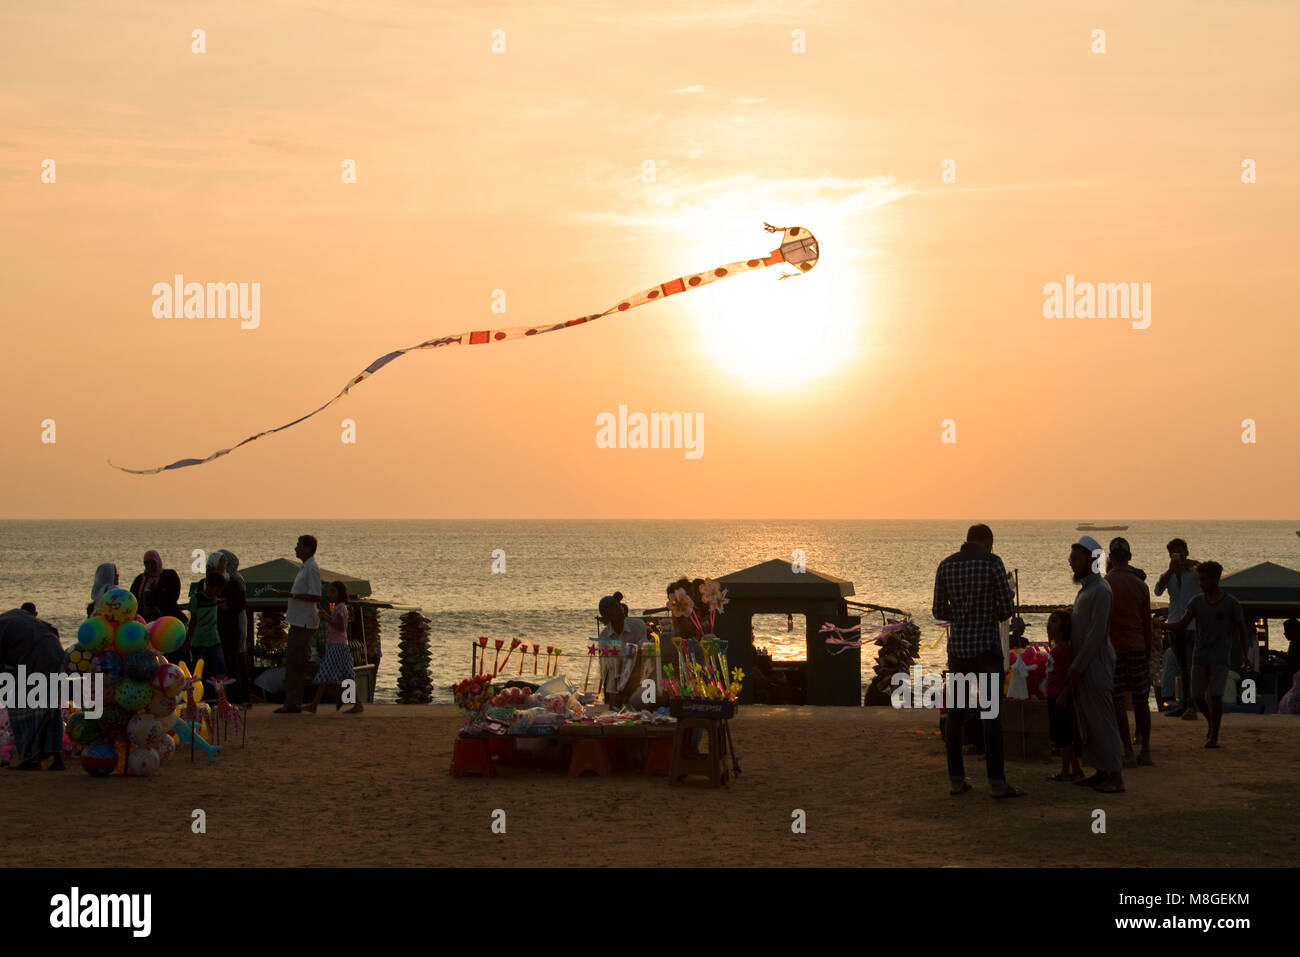 Local people and stall holders with a kite in the air on Galle Face Green at sunset - a popular spot in Colombo to spend time playing by the sea. Stock Photo